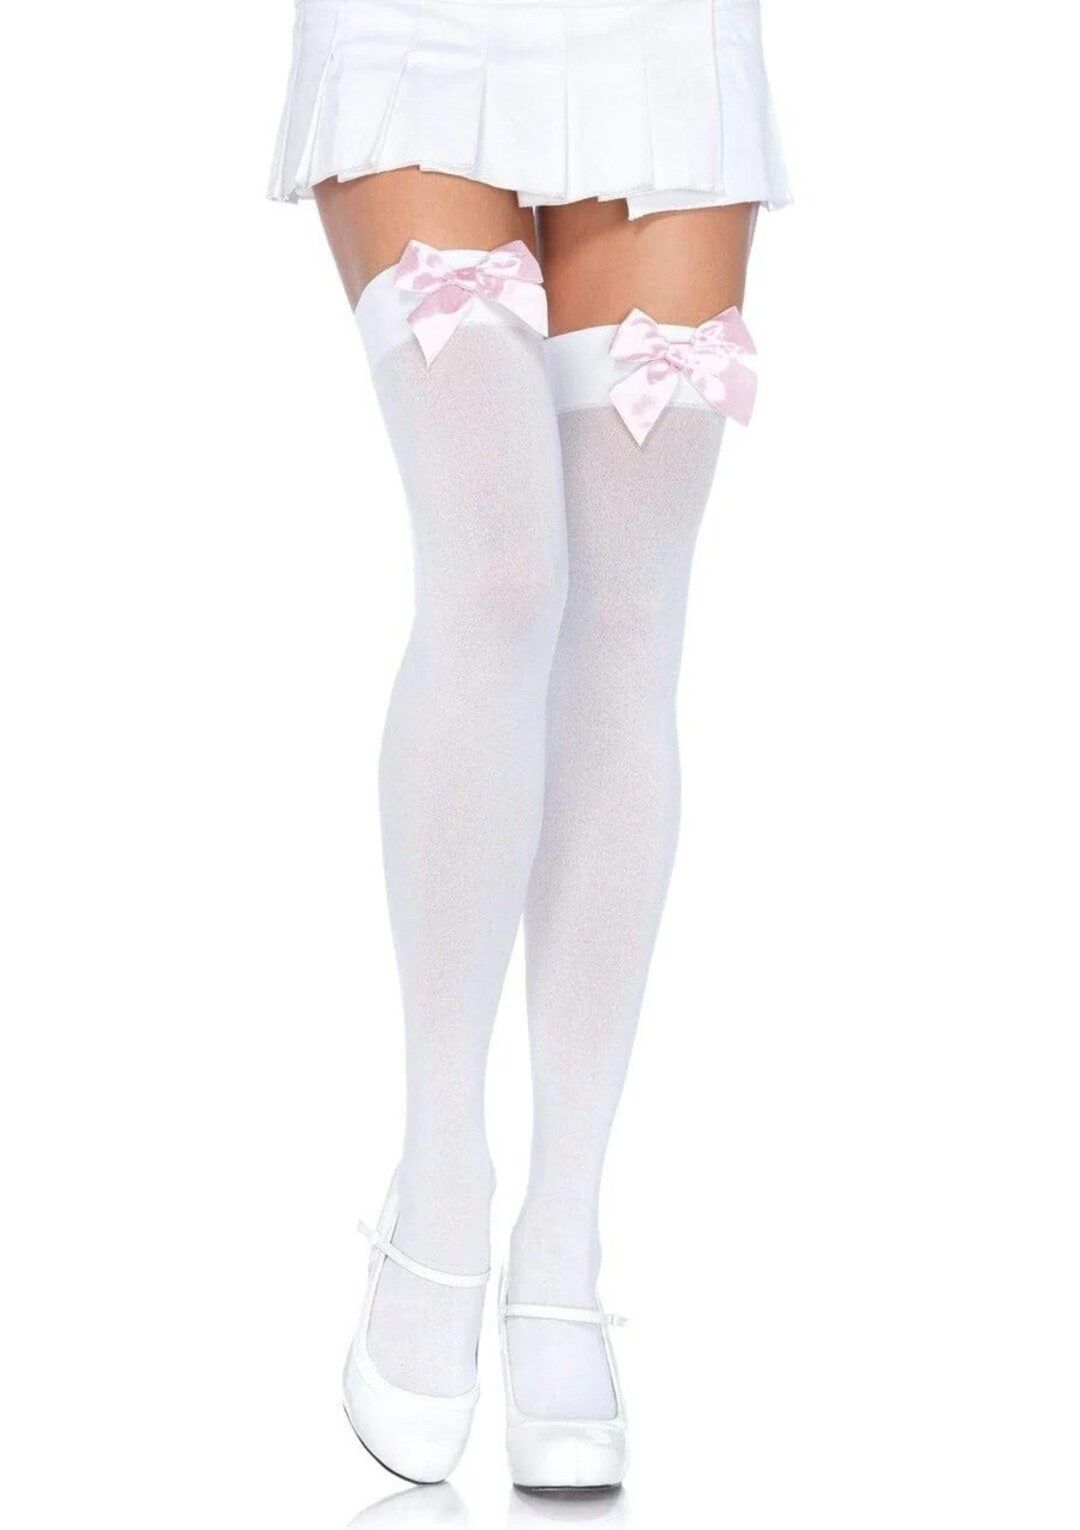 BOW THIGH HIGH Stockings Opaque White With Pink Satin Bows - Etsy | Etsy (US)